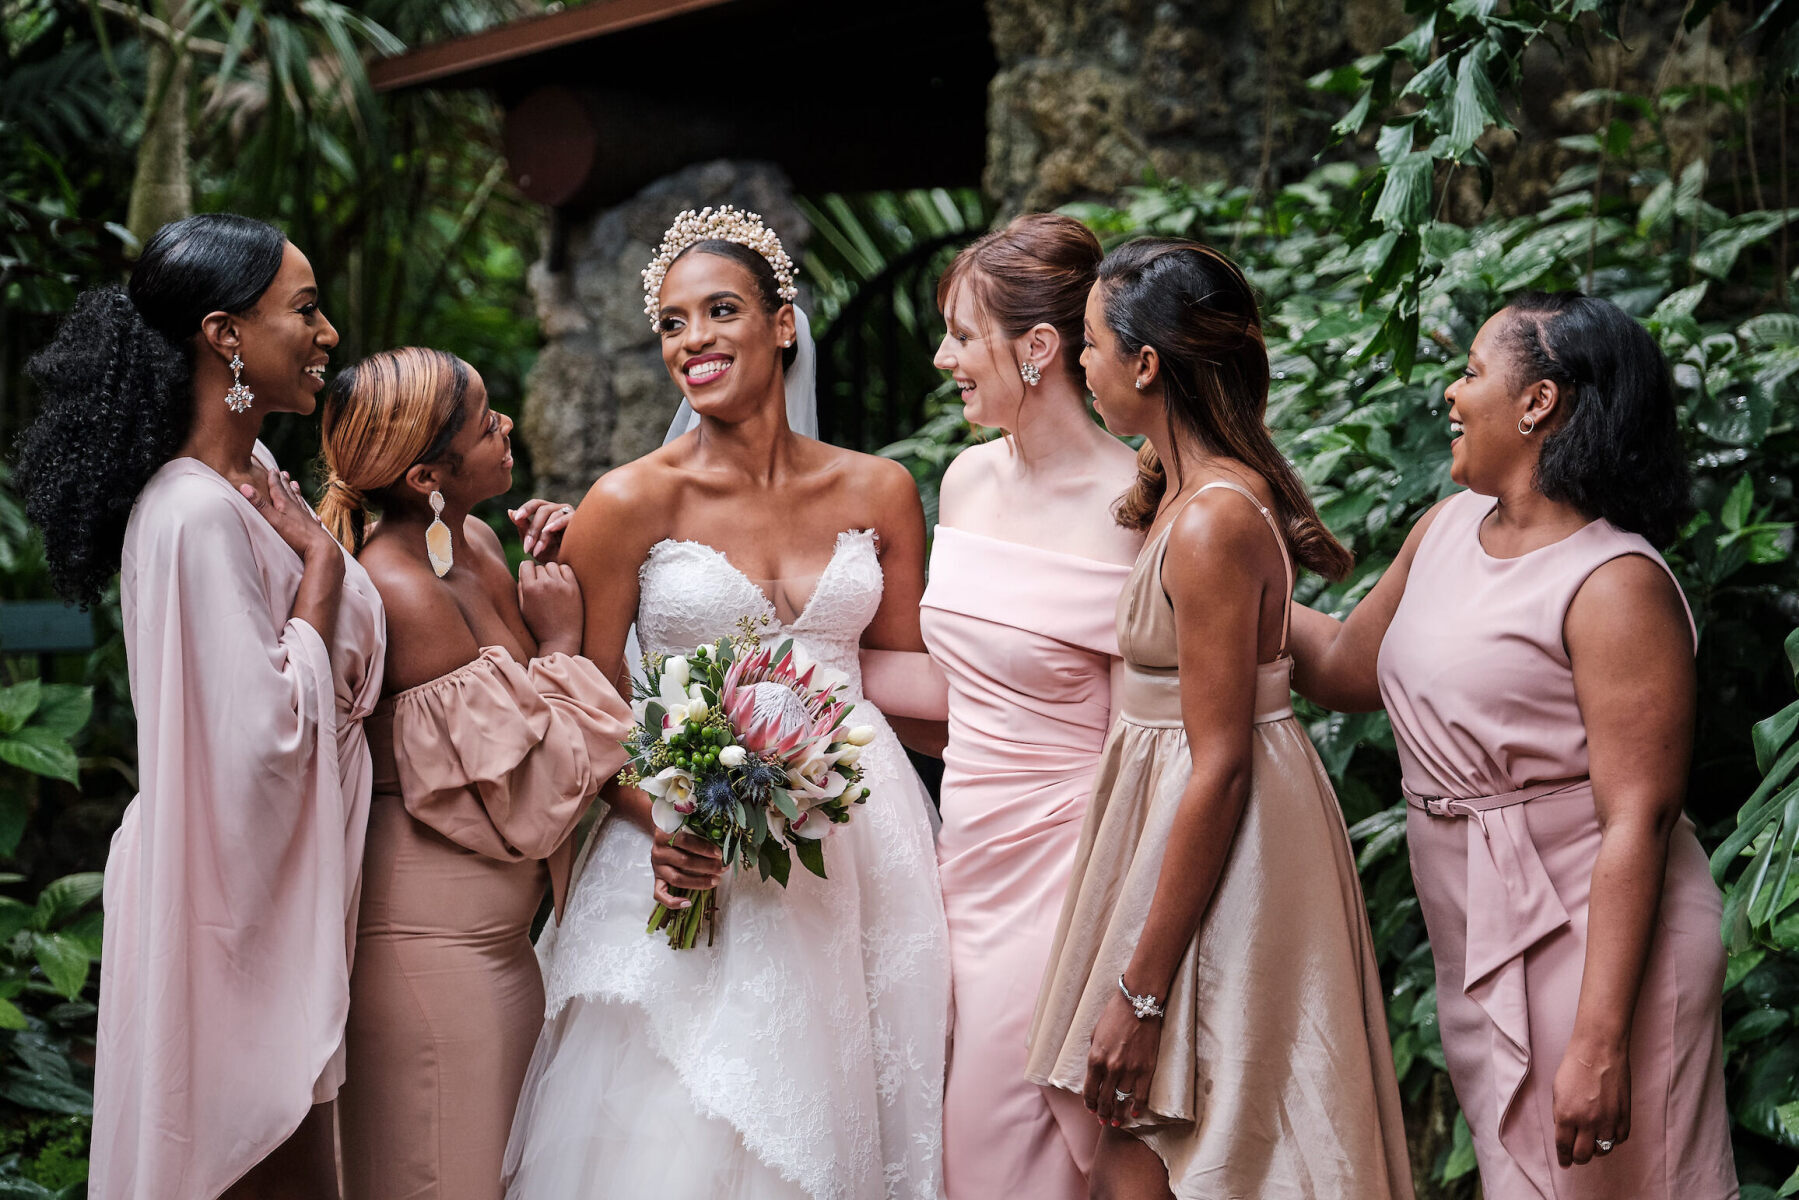 Wedding Dress Shopping: A bride smiling surrounded by her bridal party, all of whom are dressed in pink.